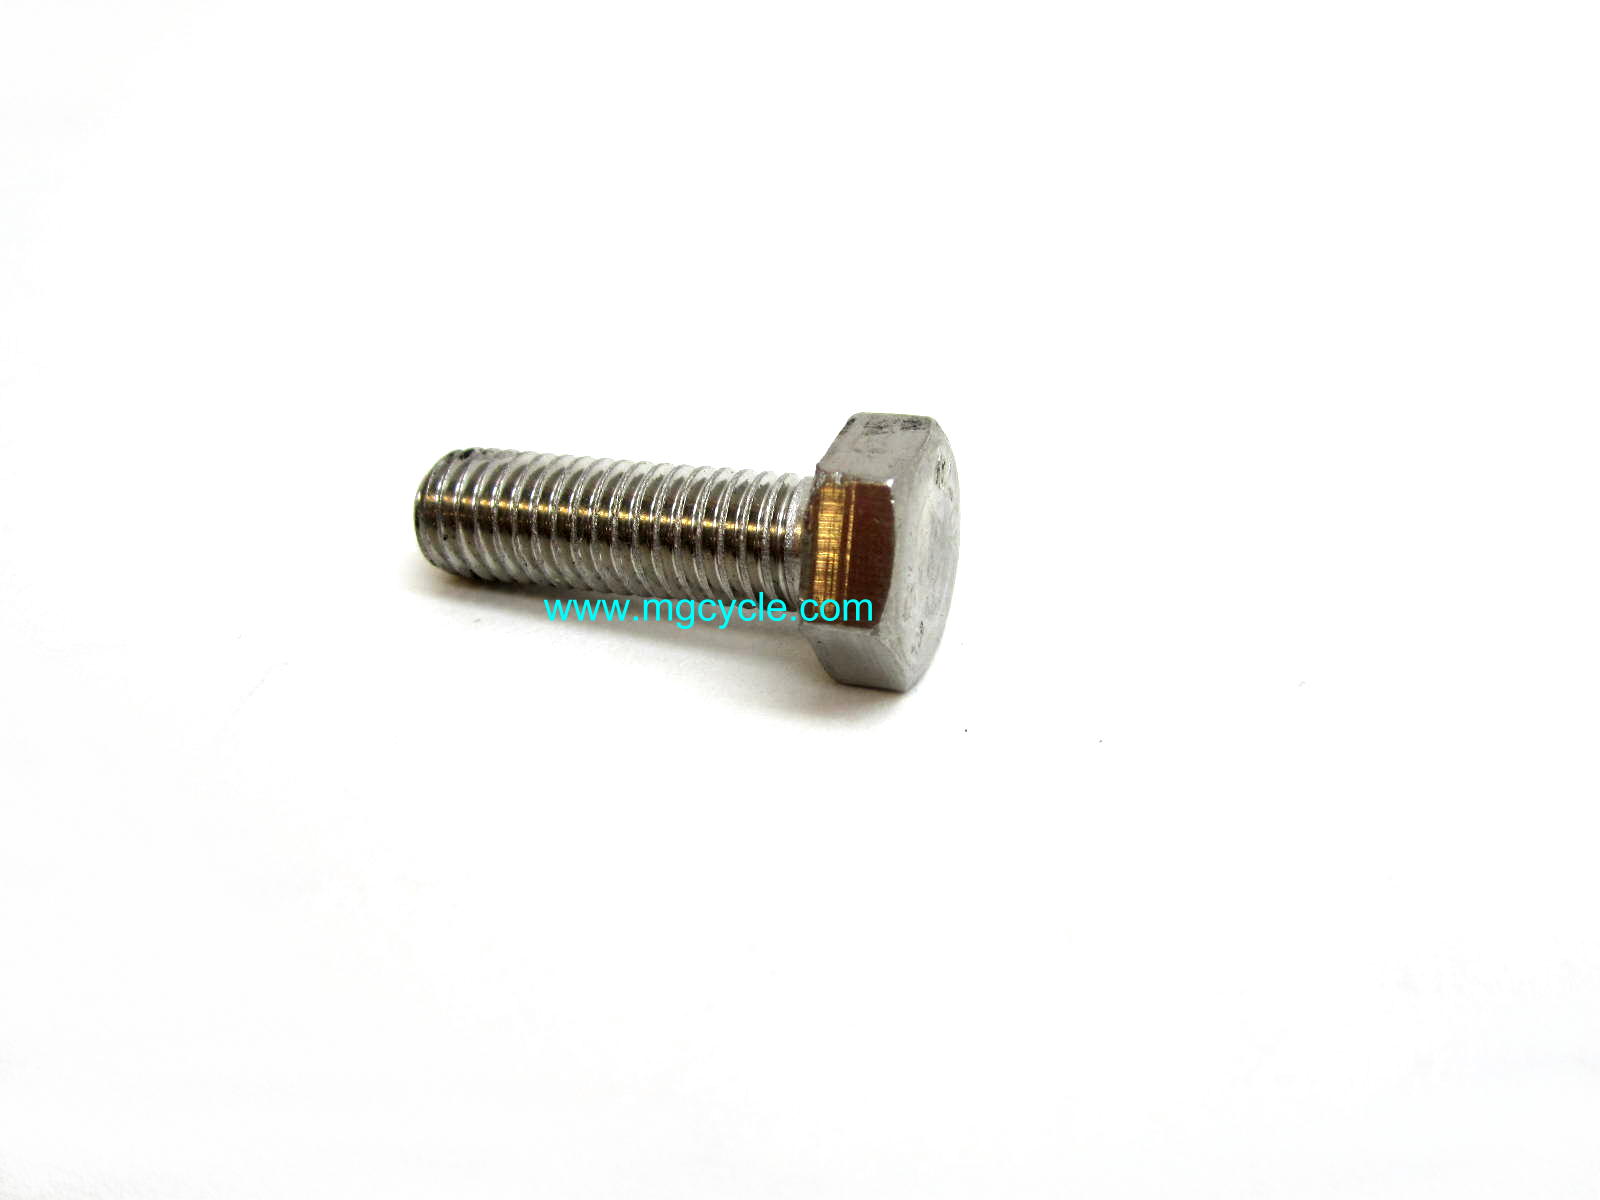 8mm stainless steel hex bolt, 25mm long - Click Image to Close